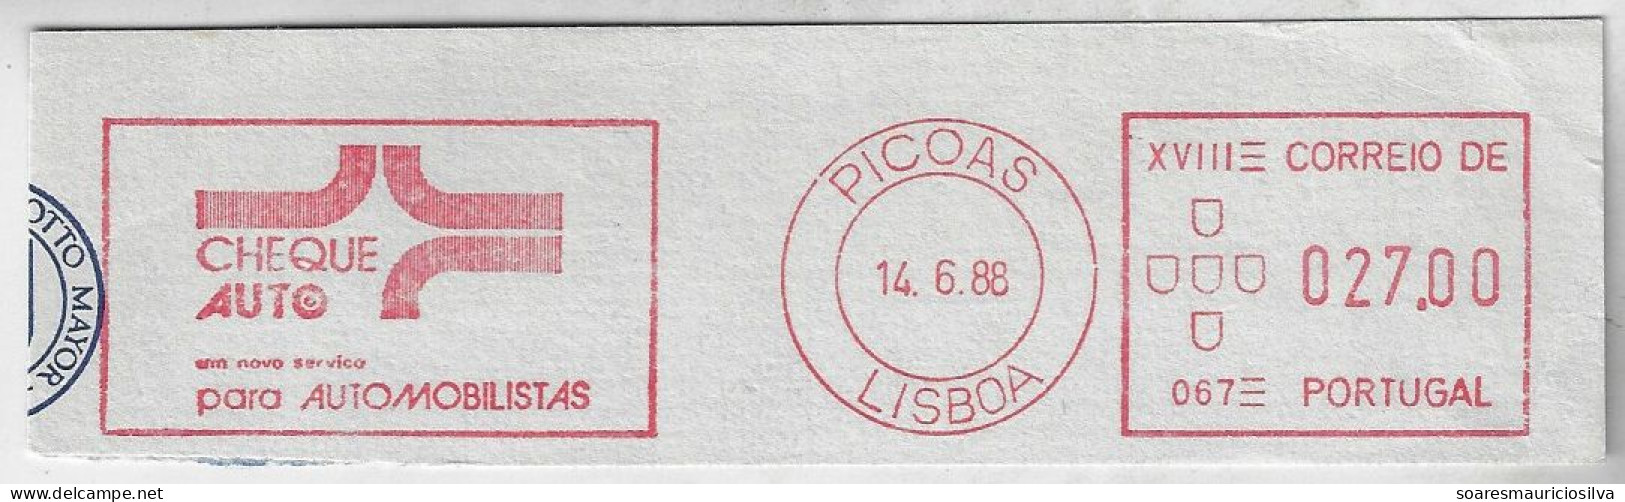 Portugal 1988 Cover Fragment Meter Stamp Hasler Mailmaster Slogan Check Auto A New Service For Motorists Lisbon Picoa - Storia Postale